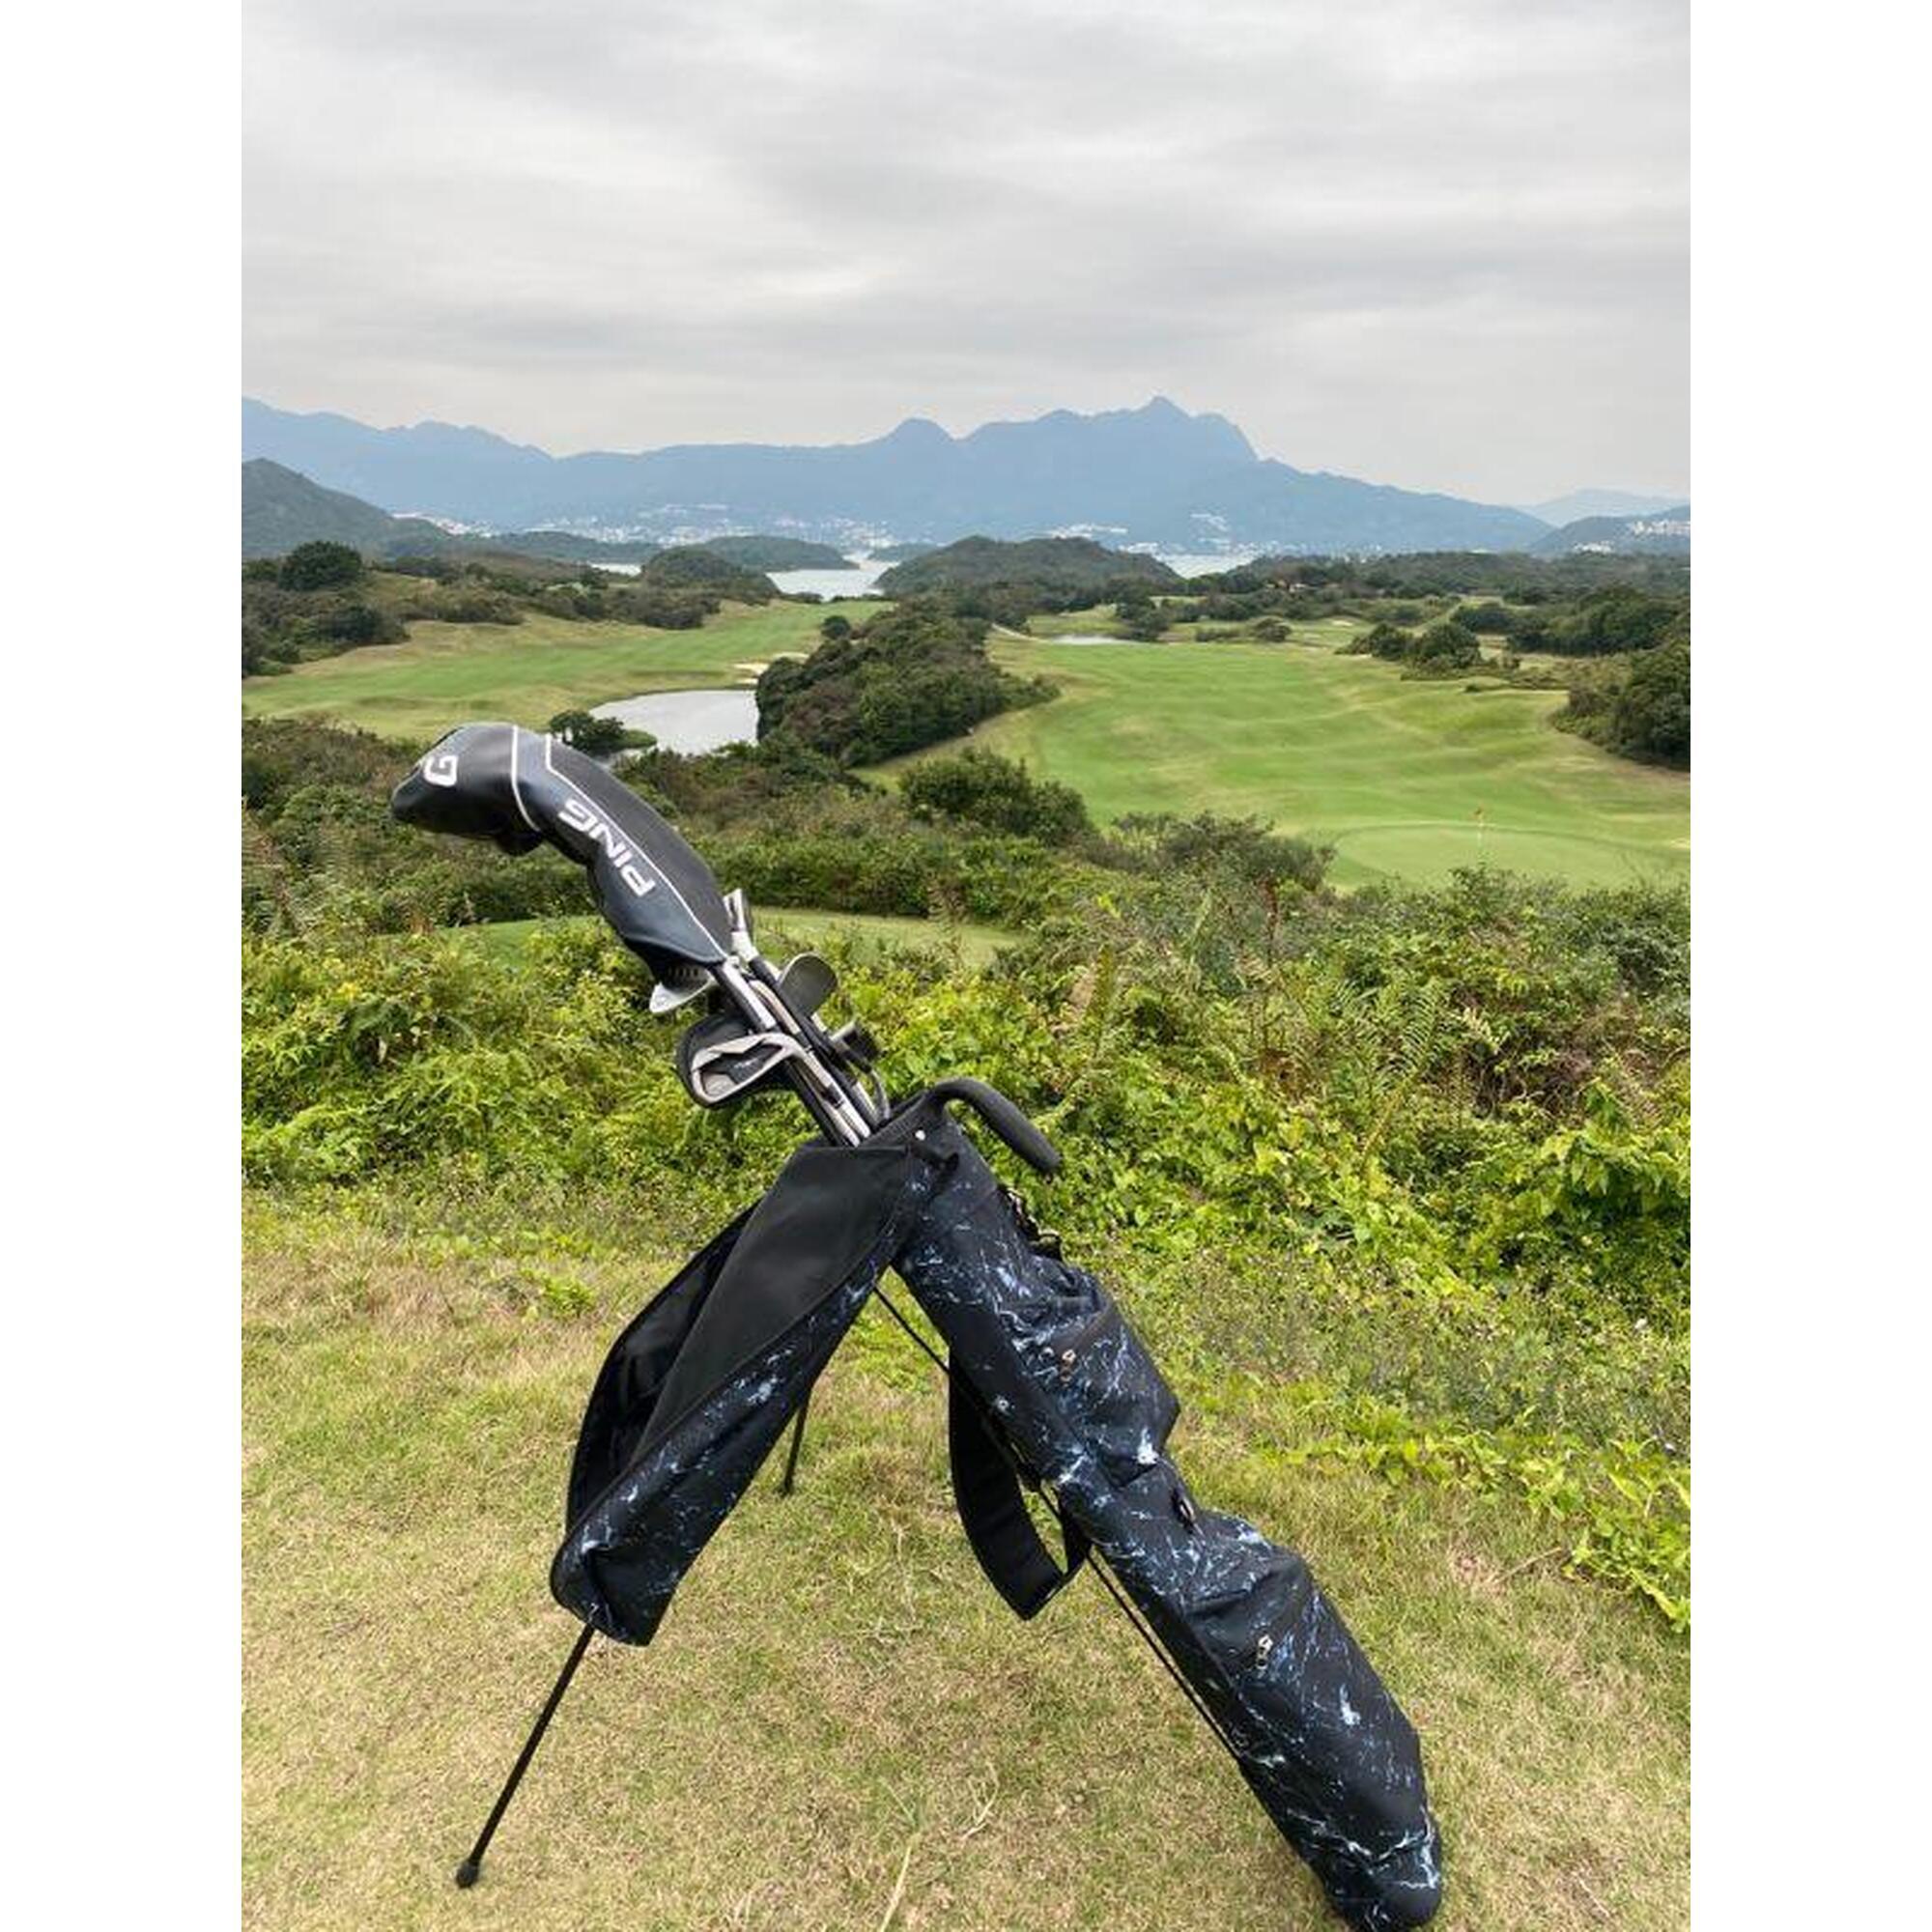 Marble GOLF BAGS WITH STAND SUITABLE FOR GOLF FIELD - Black